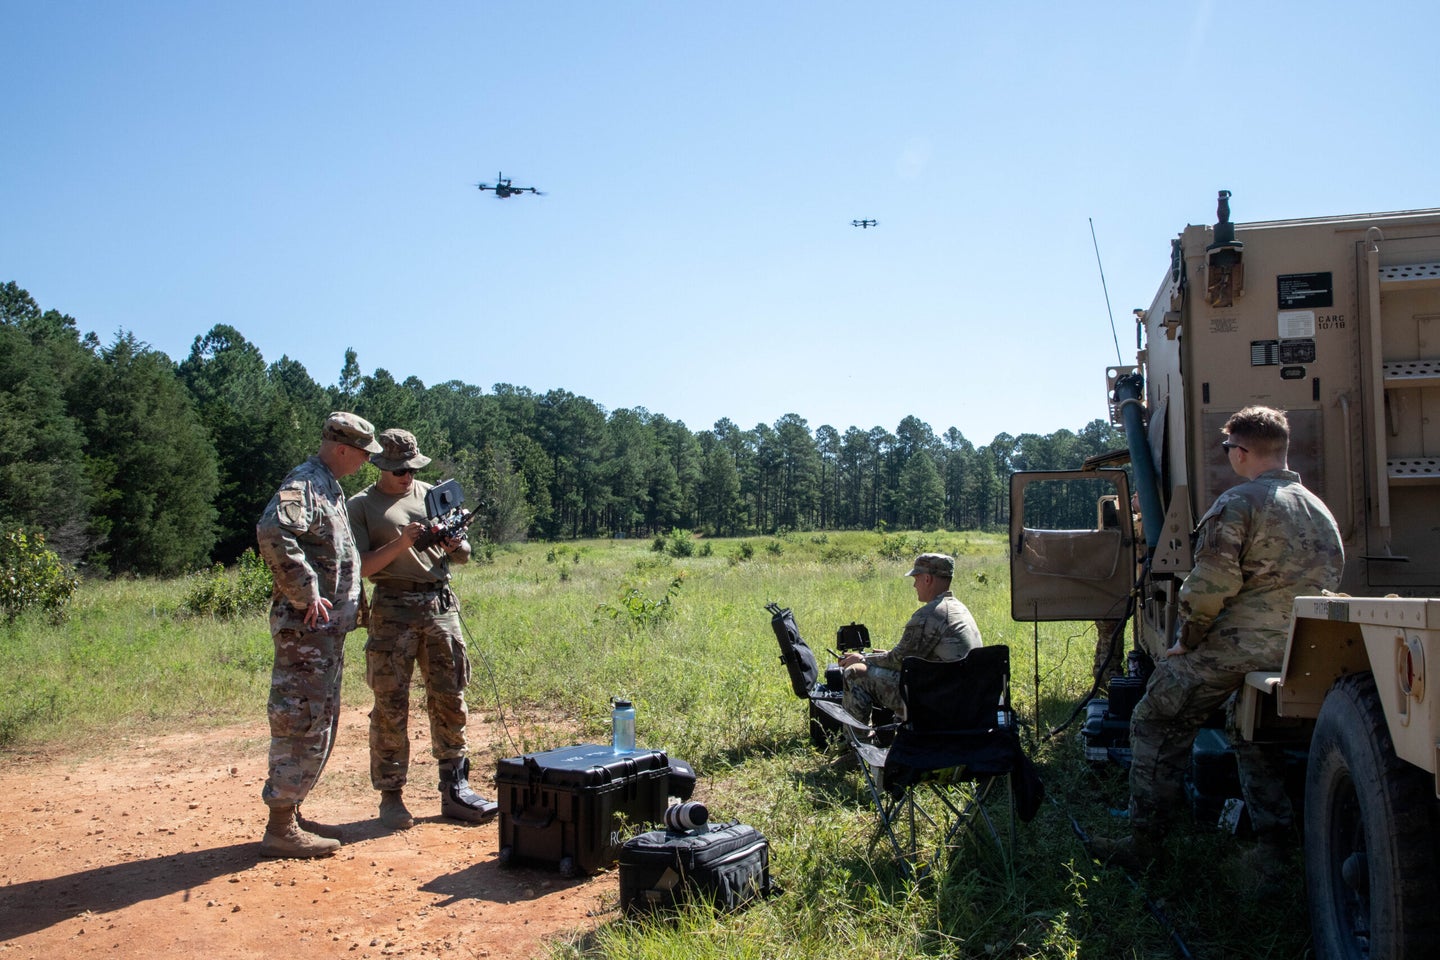 Soldiers at Fort Liberty are dropping munitions from drones during field training, the first in the Army to do so, according to Army officials. (U.S. Army photo by Spc. Ashley Xie)
